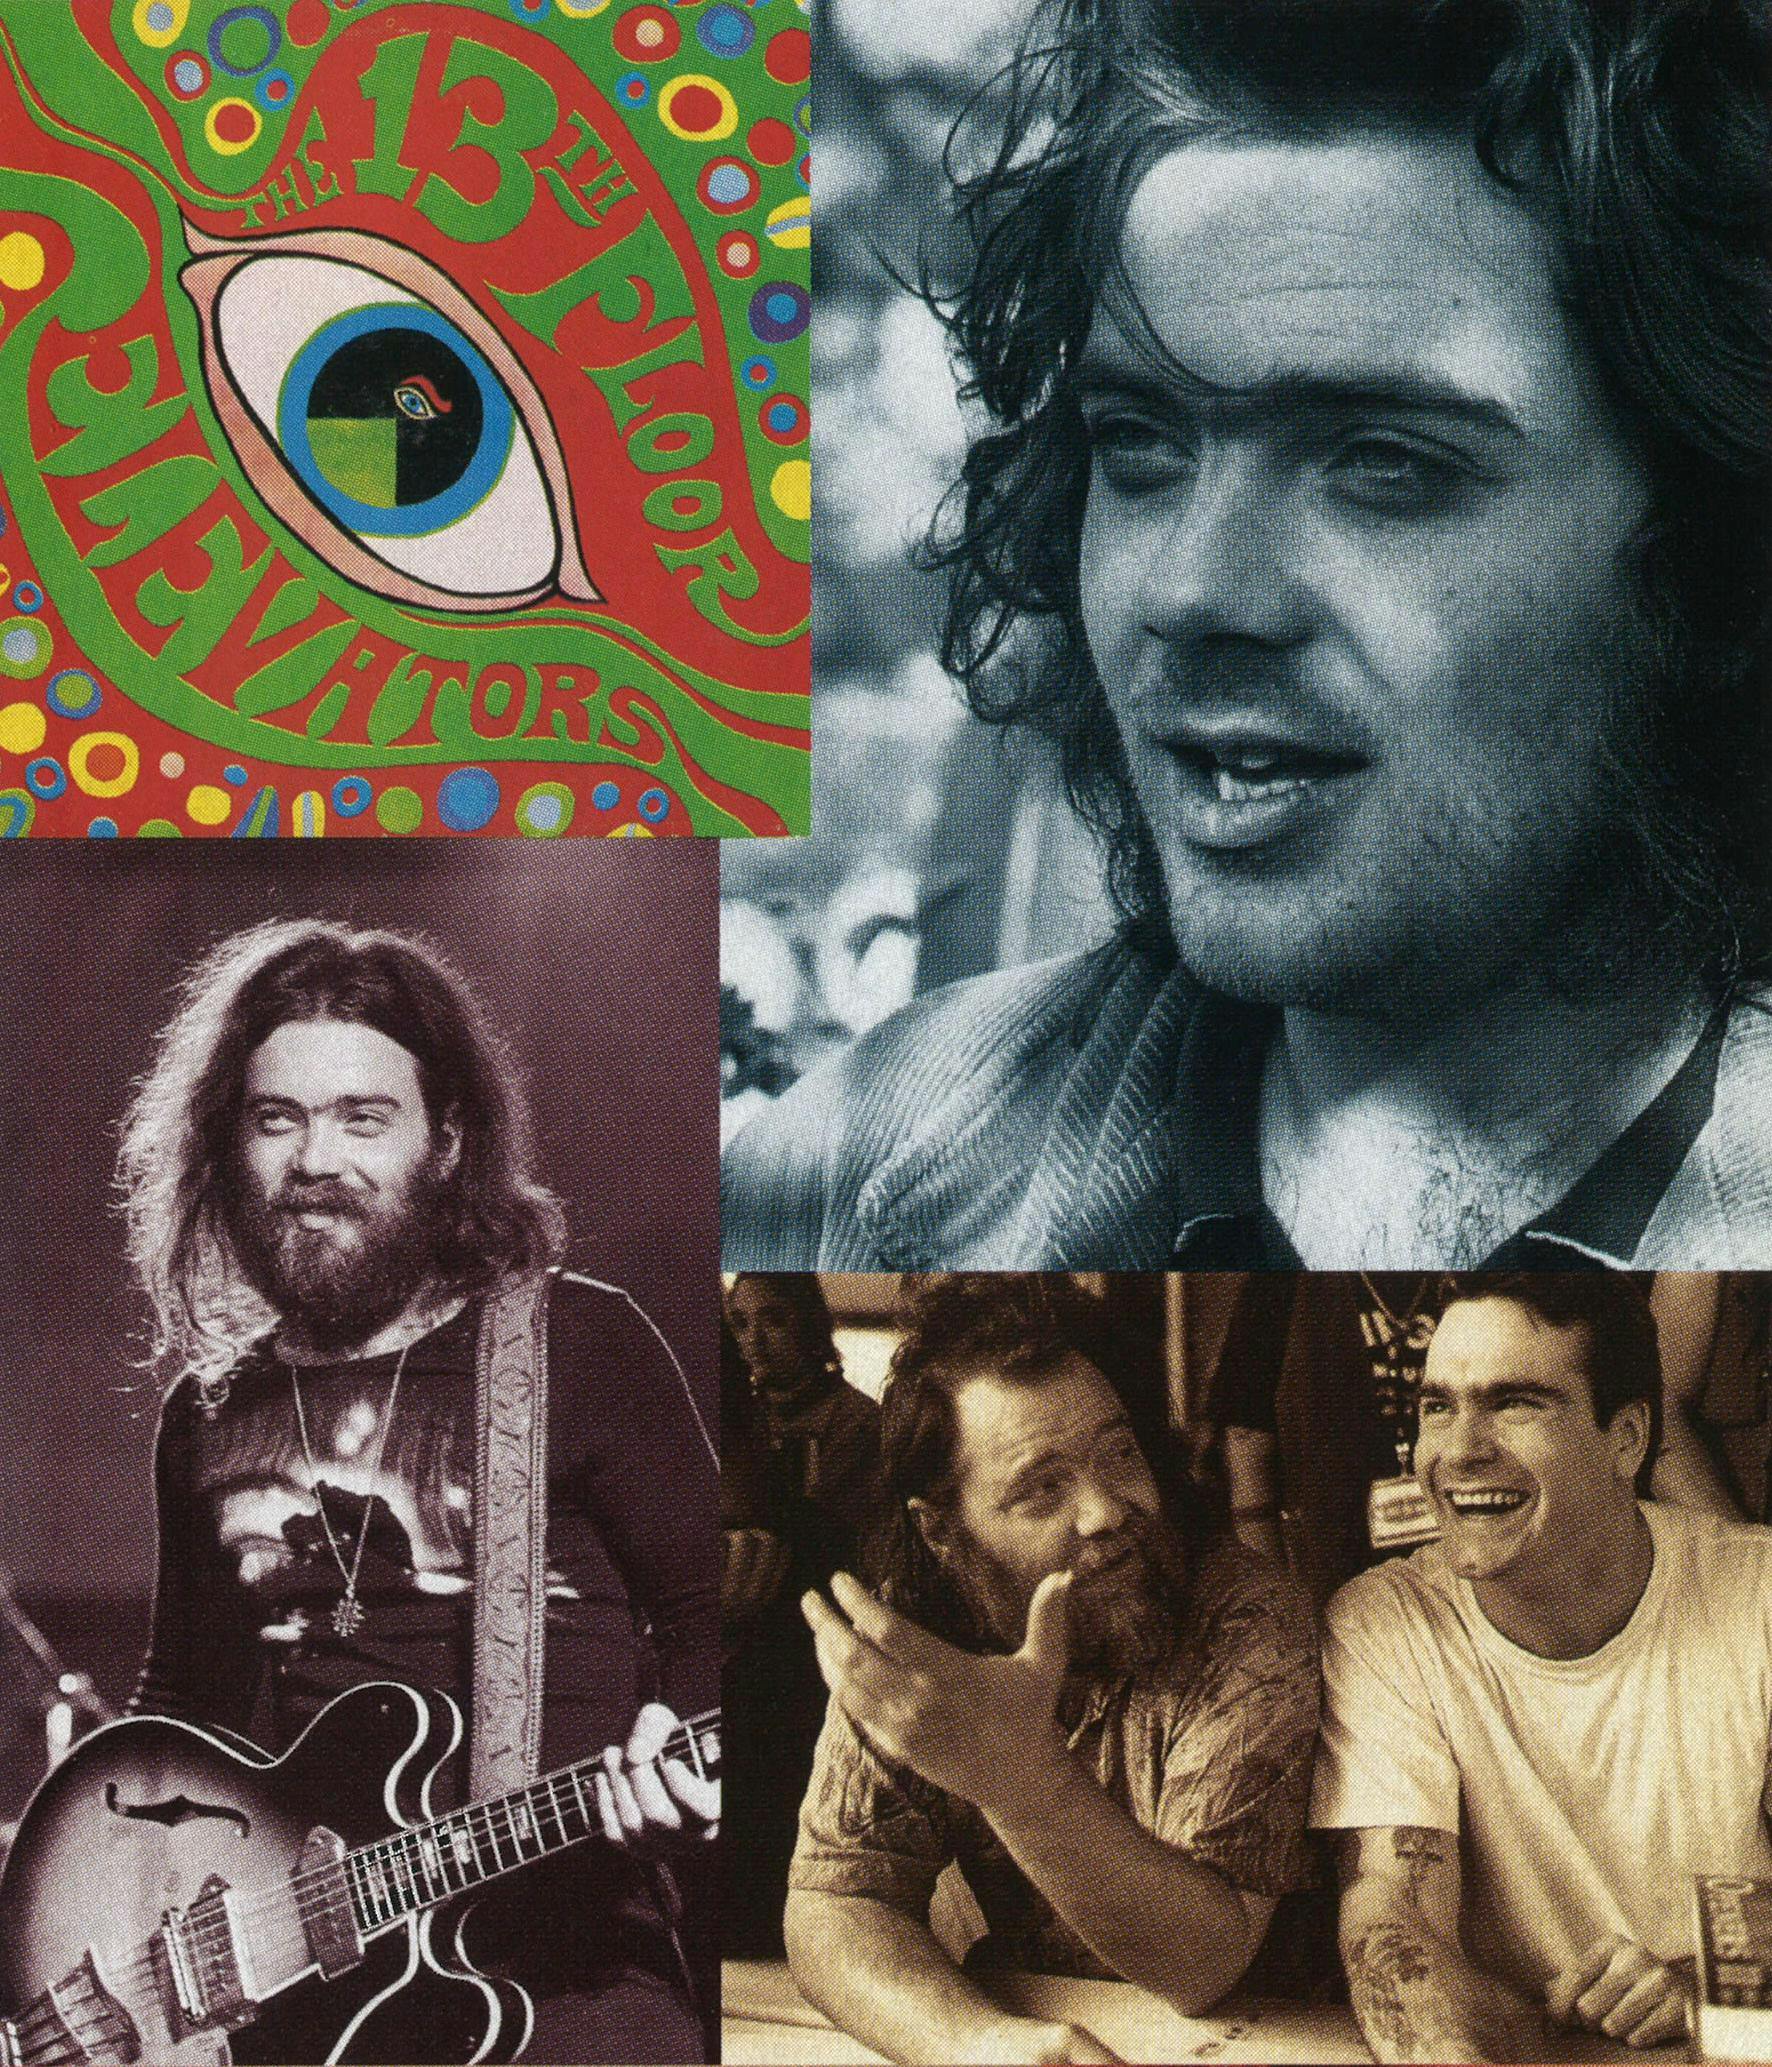 Clockwise from top left: Cover art for the first Elevators album; singing in 1974; with Henry Rollins in 1995; onstage at the Austin Opera House in 1977.